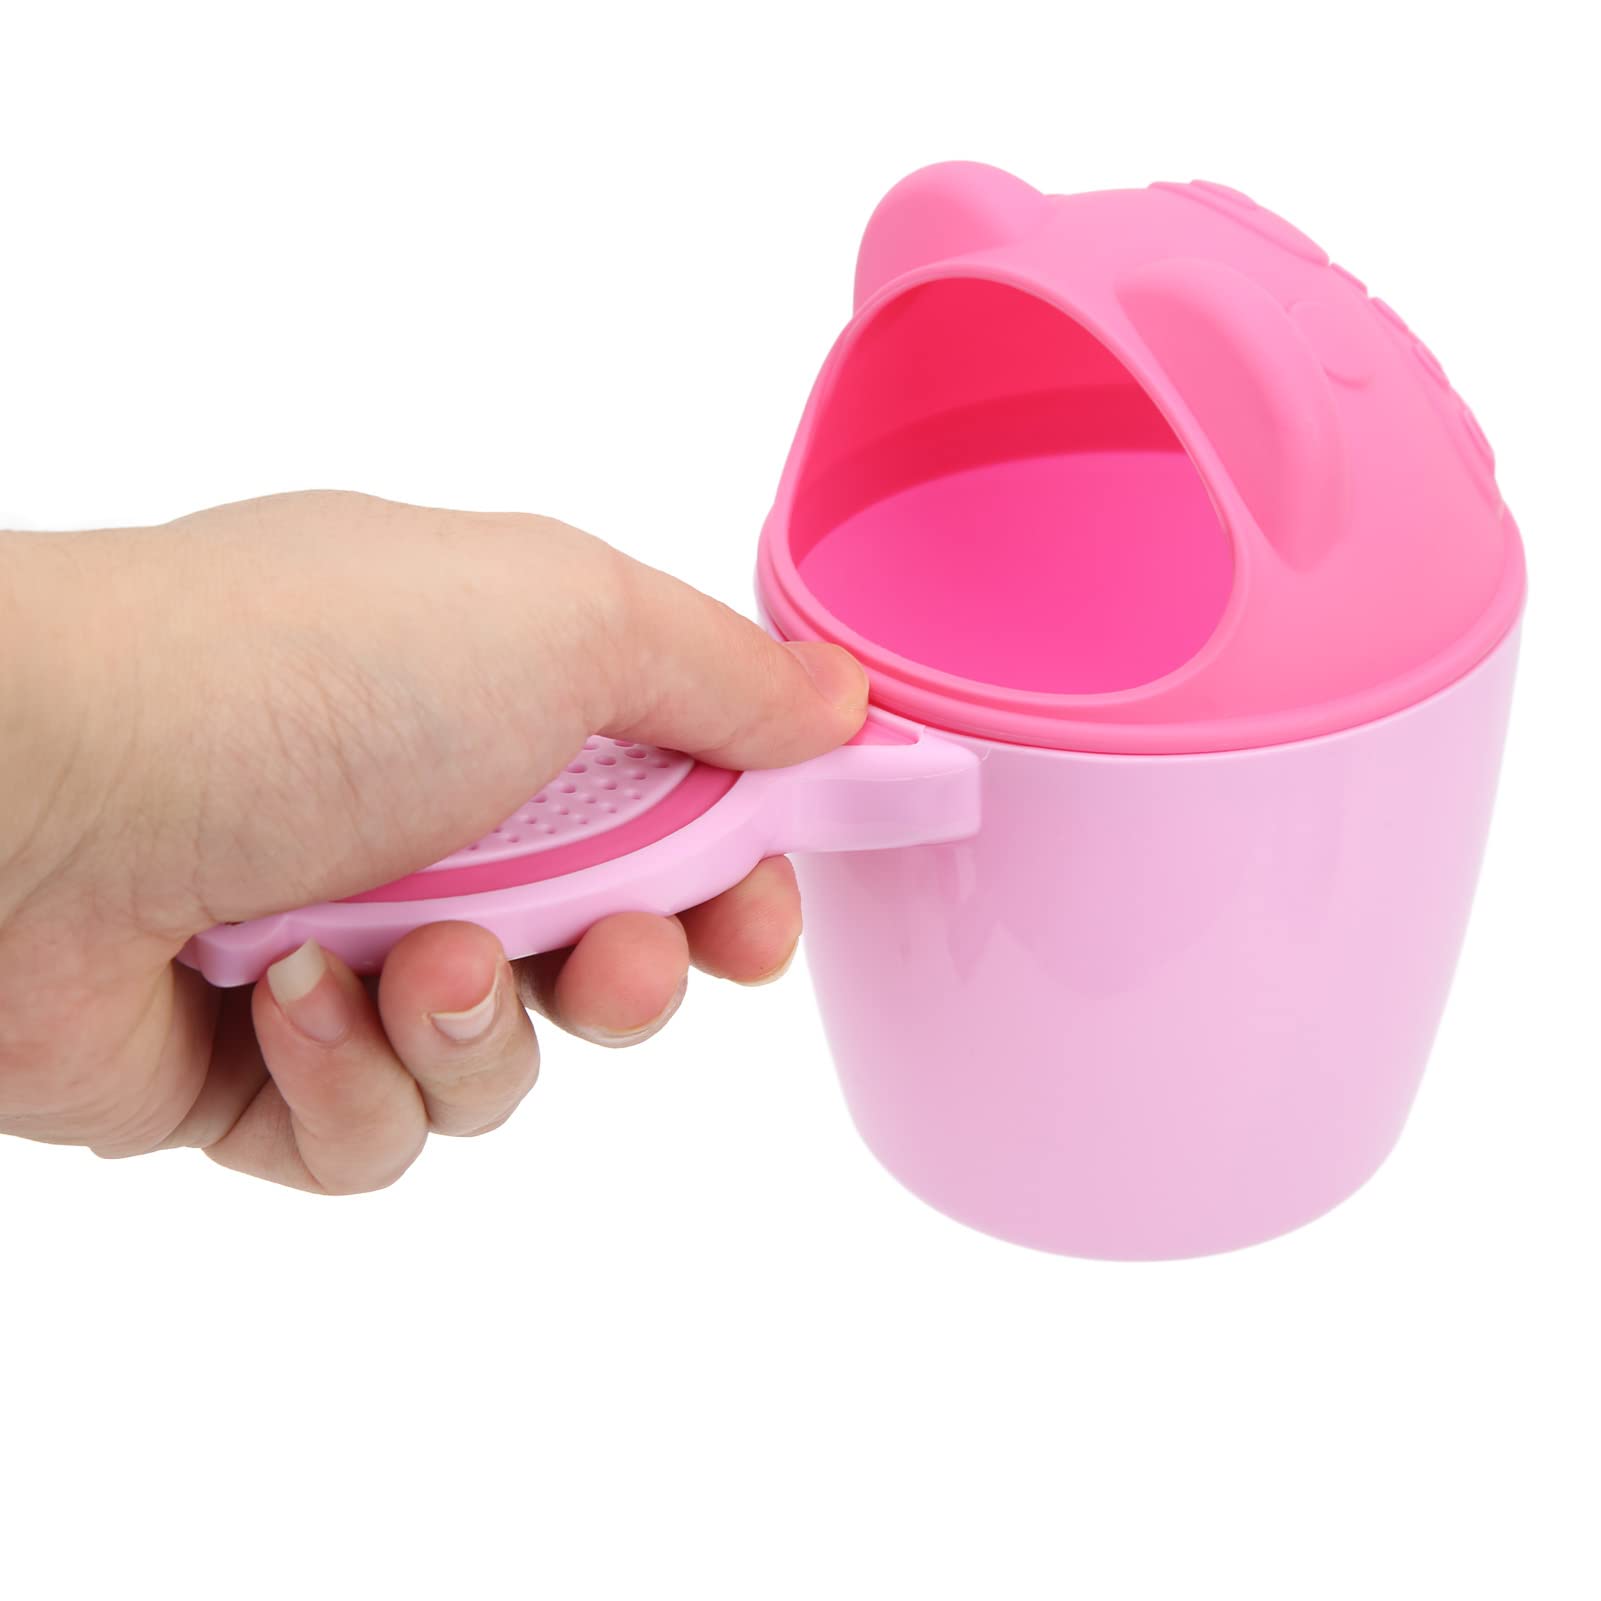 Baby Shampoo Rinse Cup, Baby Waterfall Rinser Bath Cup Pink Eye Protection for Baby Bath